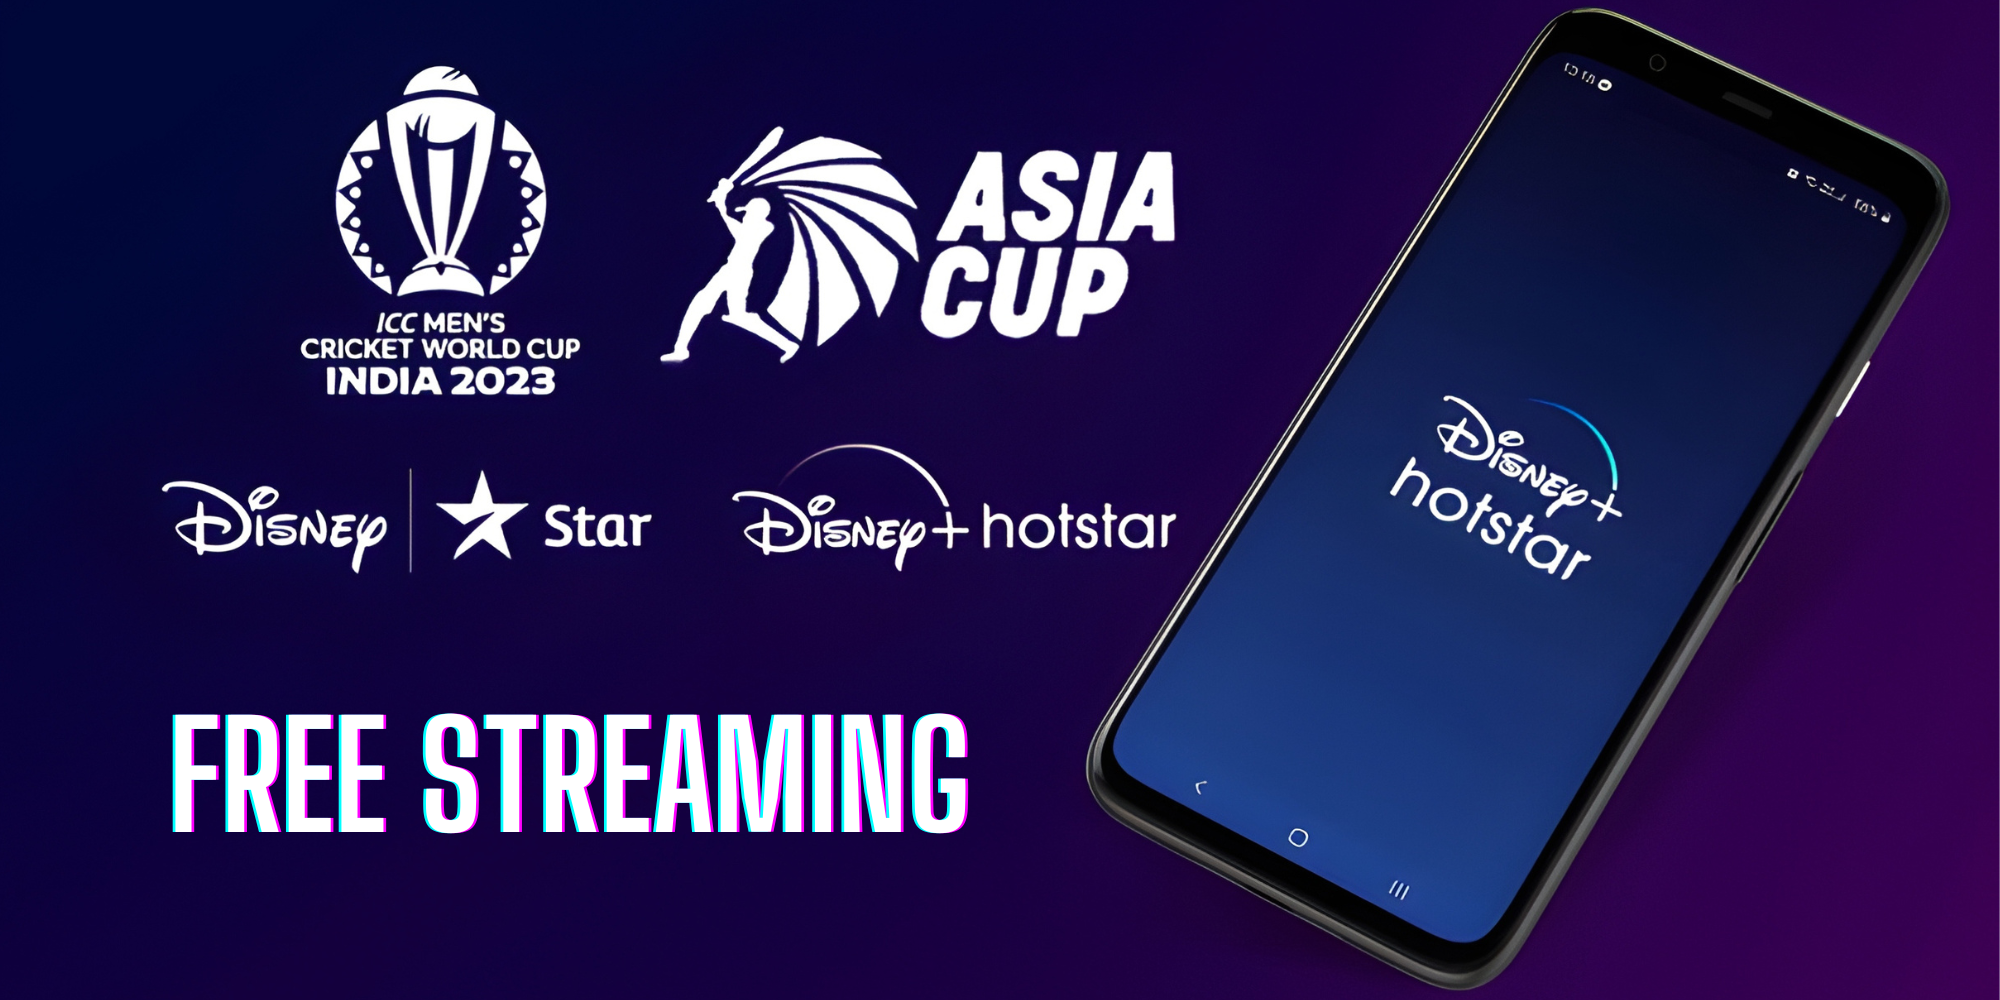 Hotstar Offers Free Streaming: ICC & Asia Cup for Mobile Users